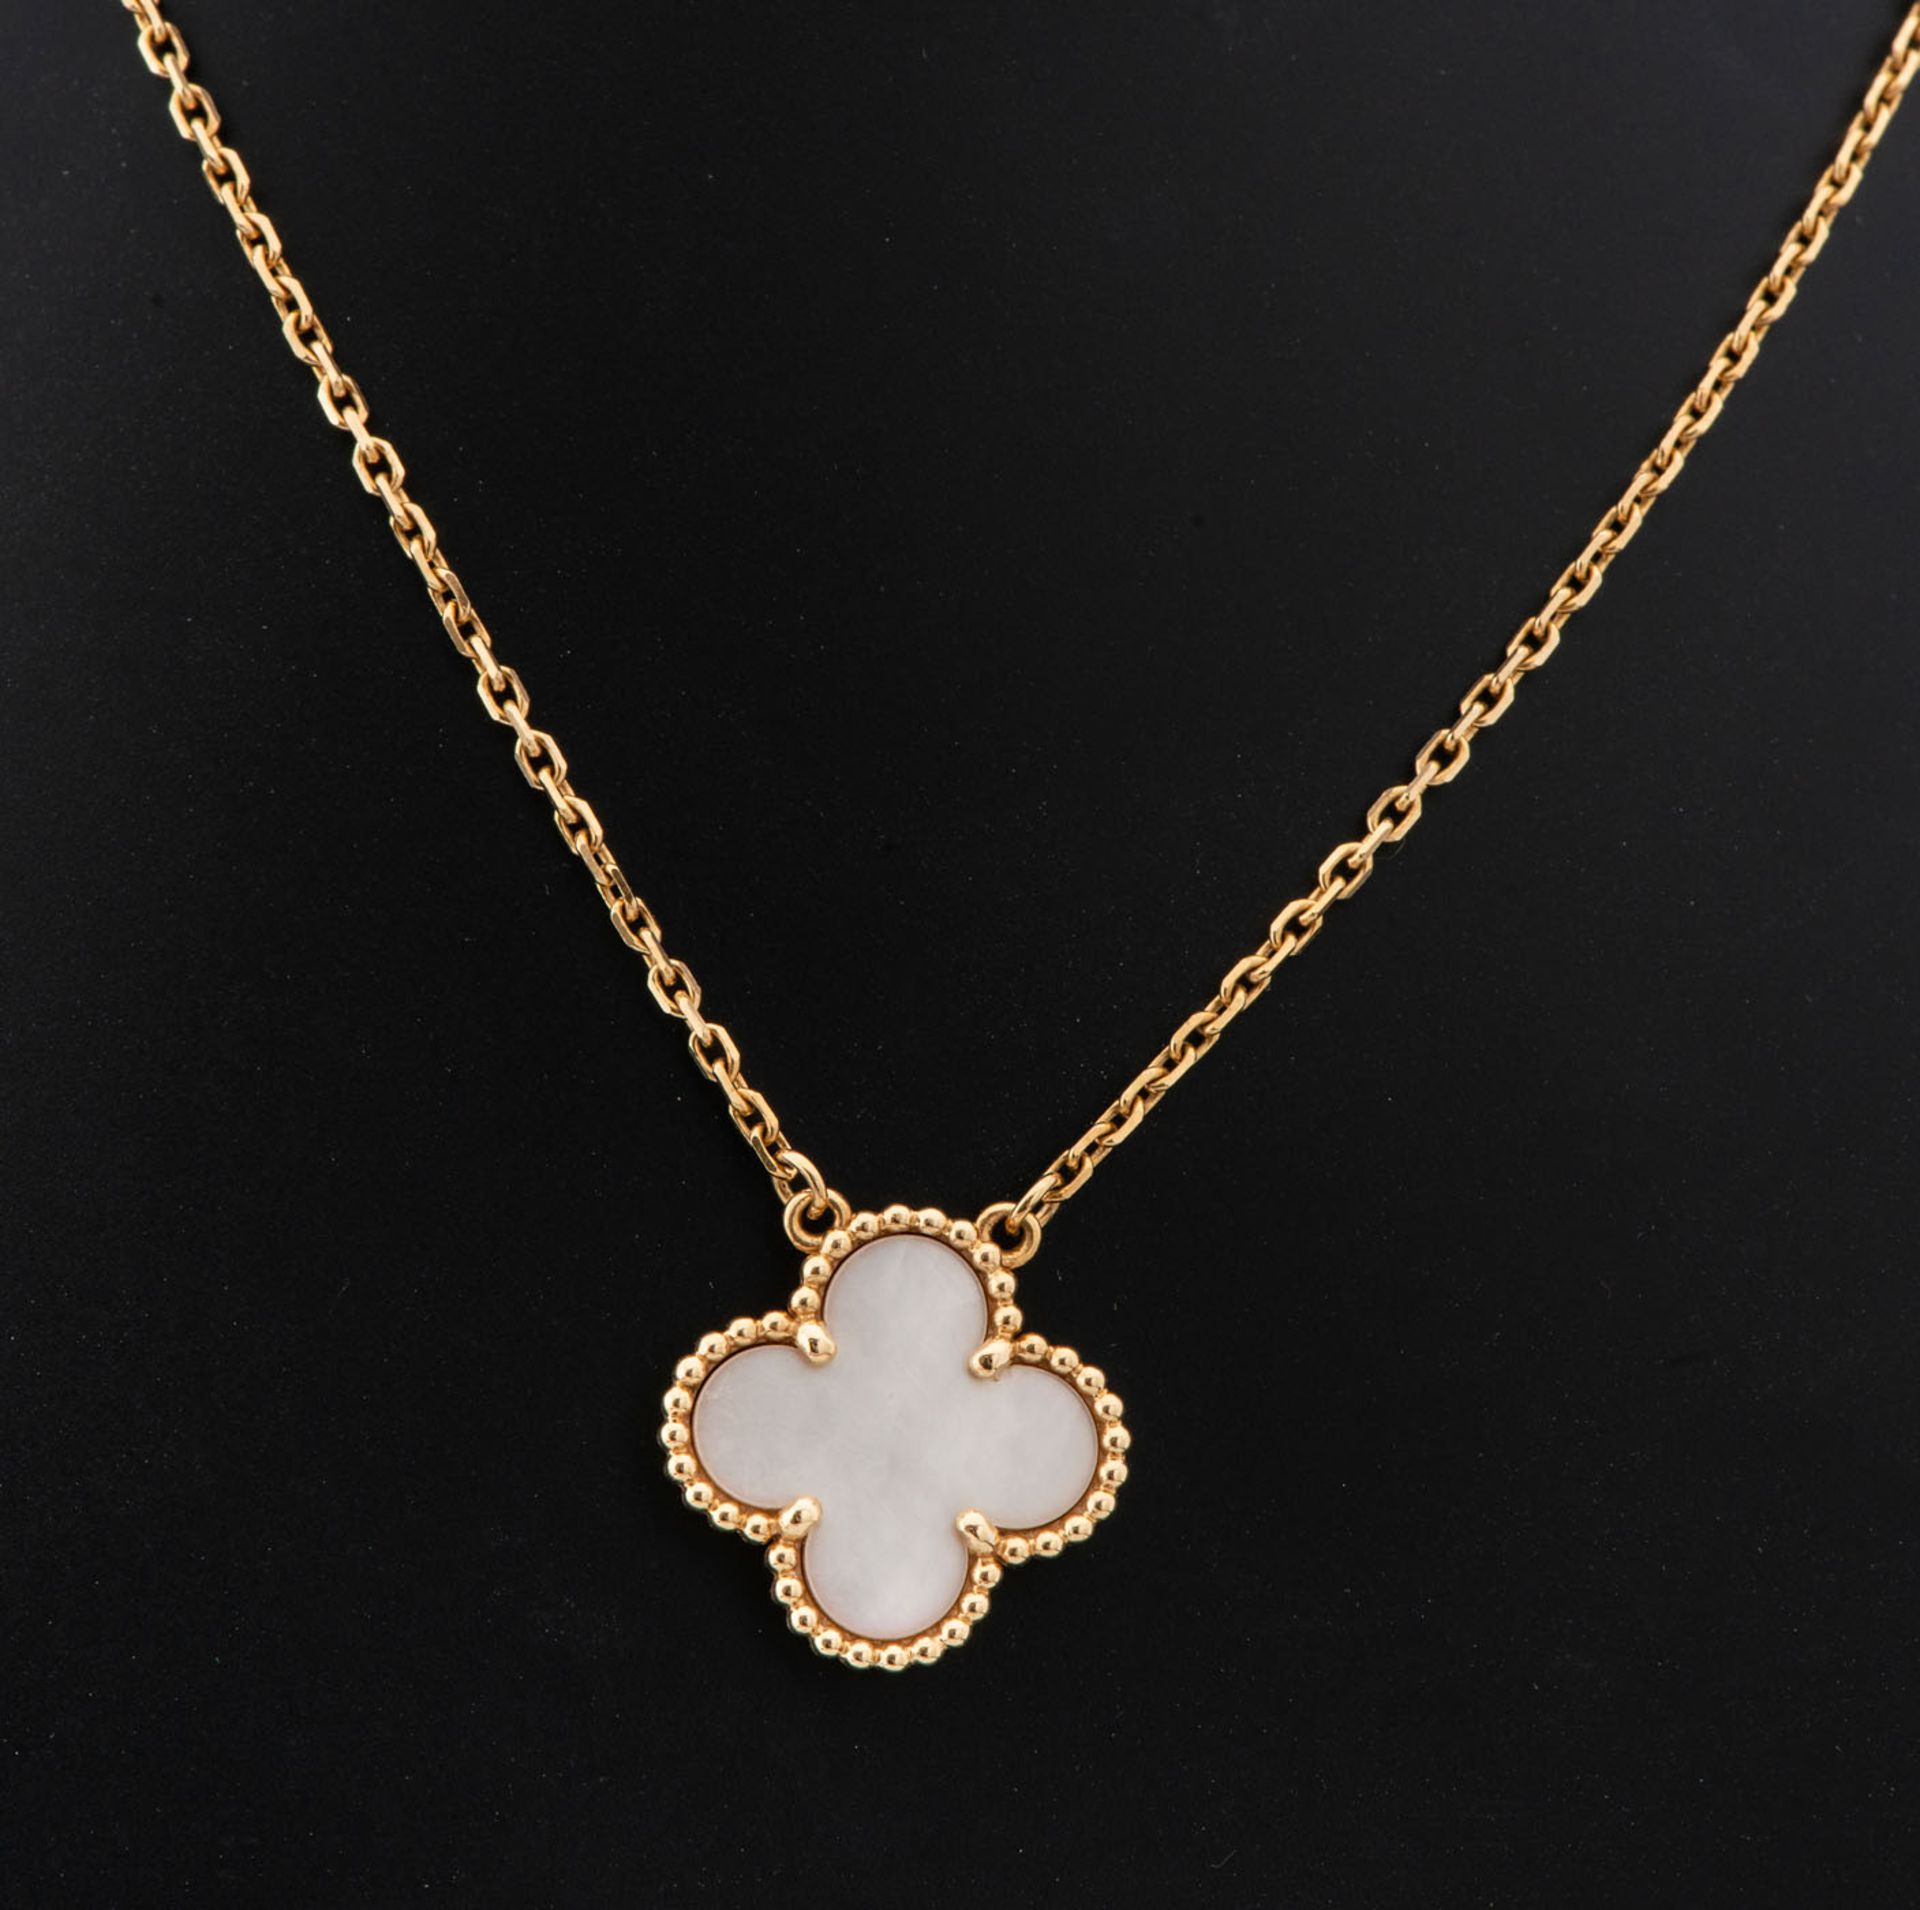 A Pair of Vintage Van Cleef and Arpels "Alhambra" 18K Gold and Mother of Pearl Pendant